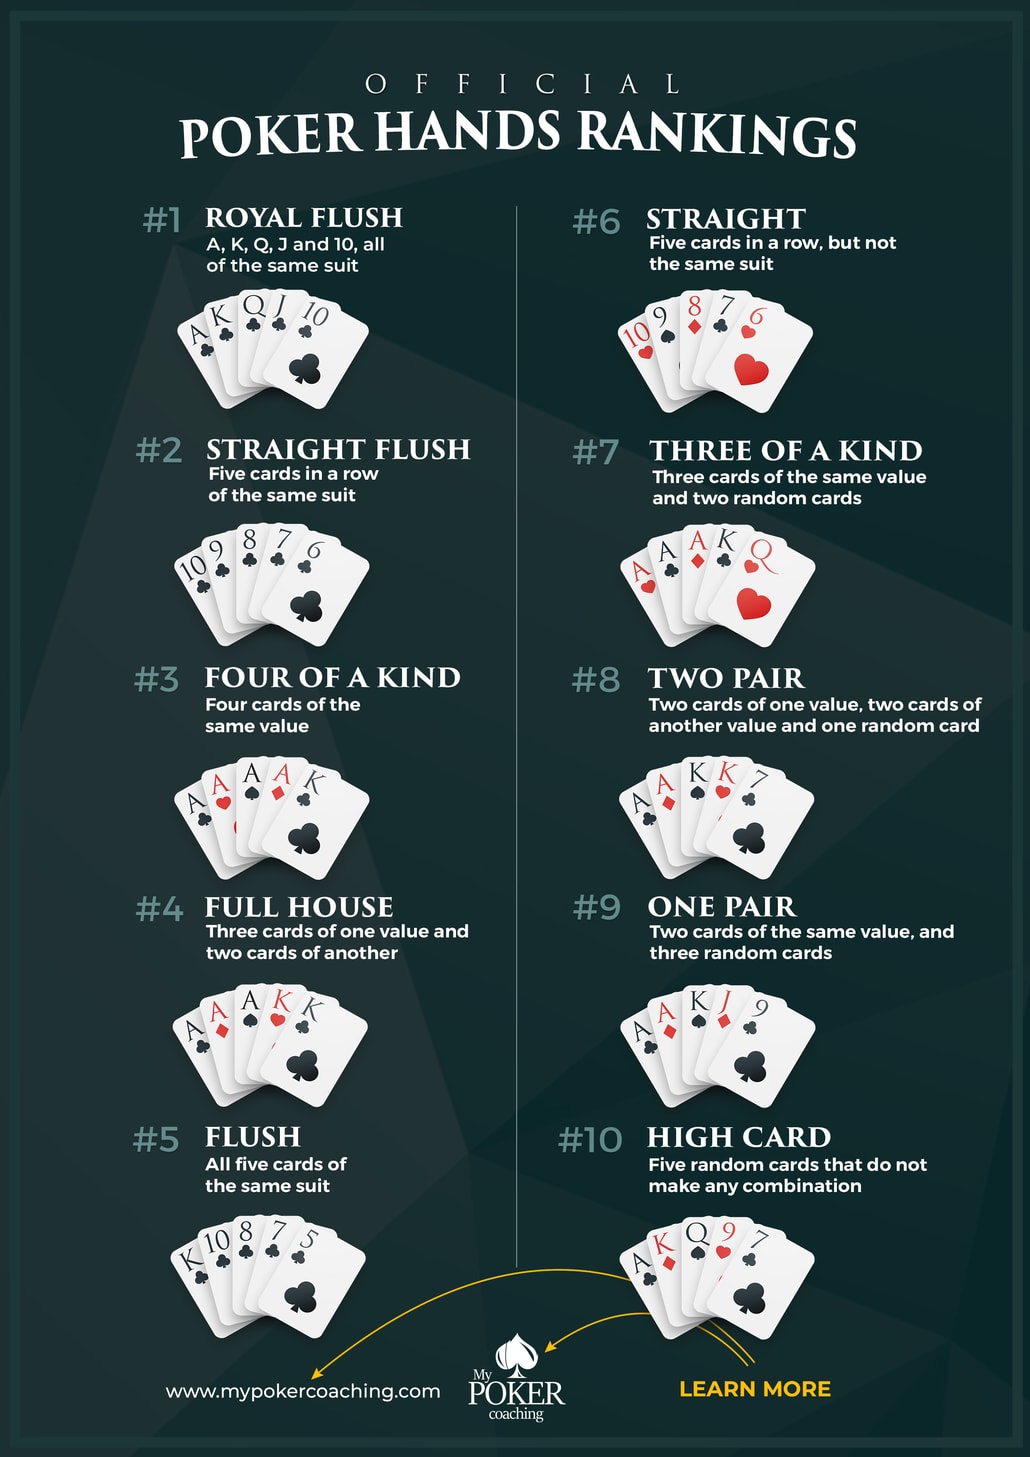 9 Key Tactics The Pros Use For poker match